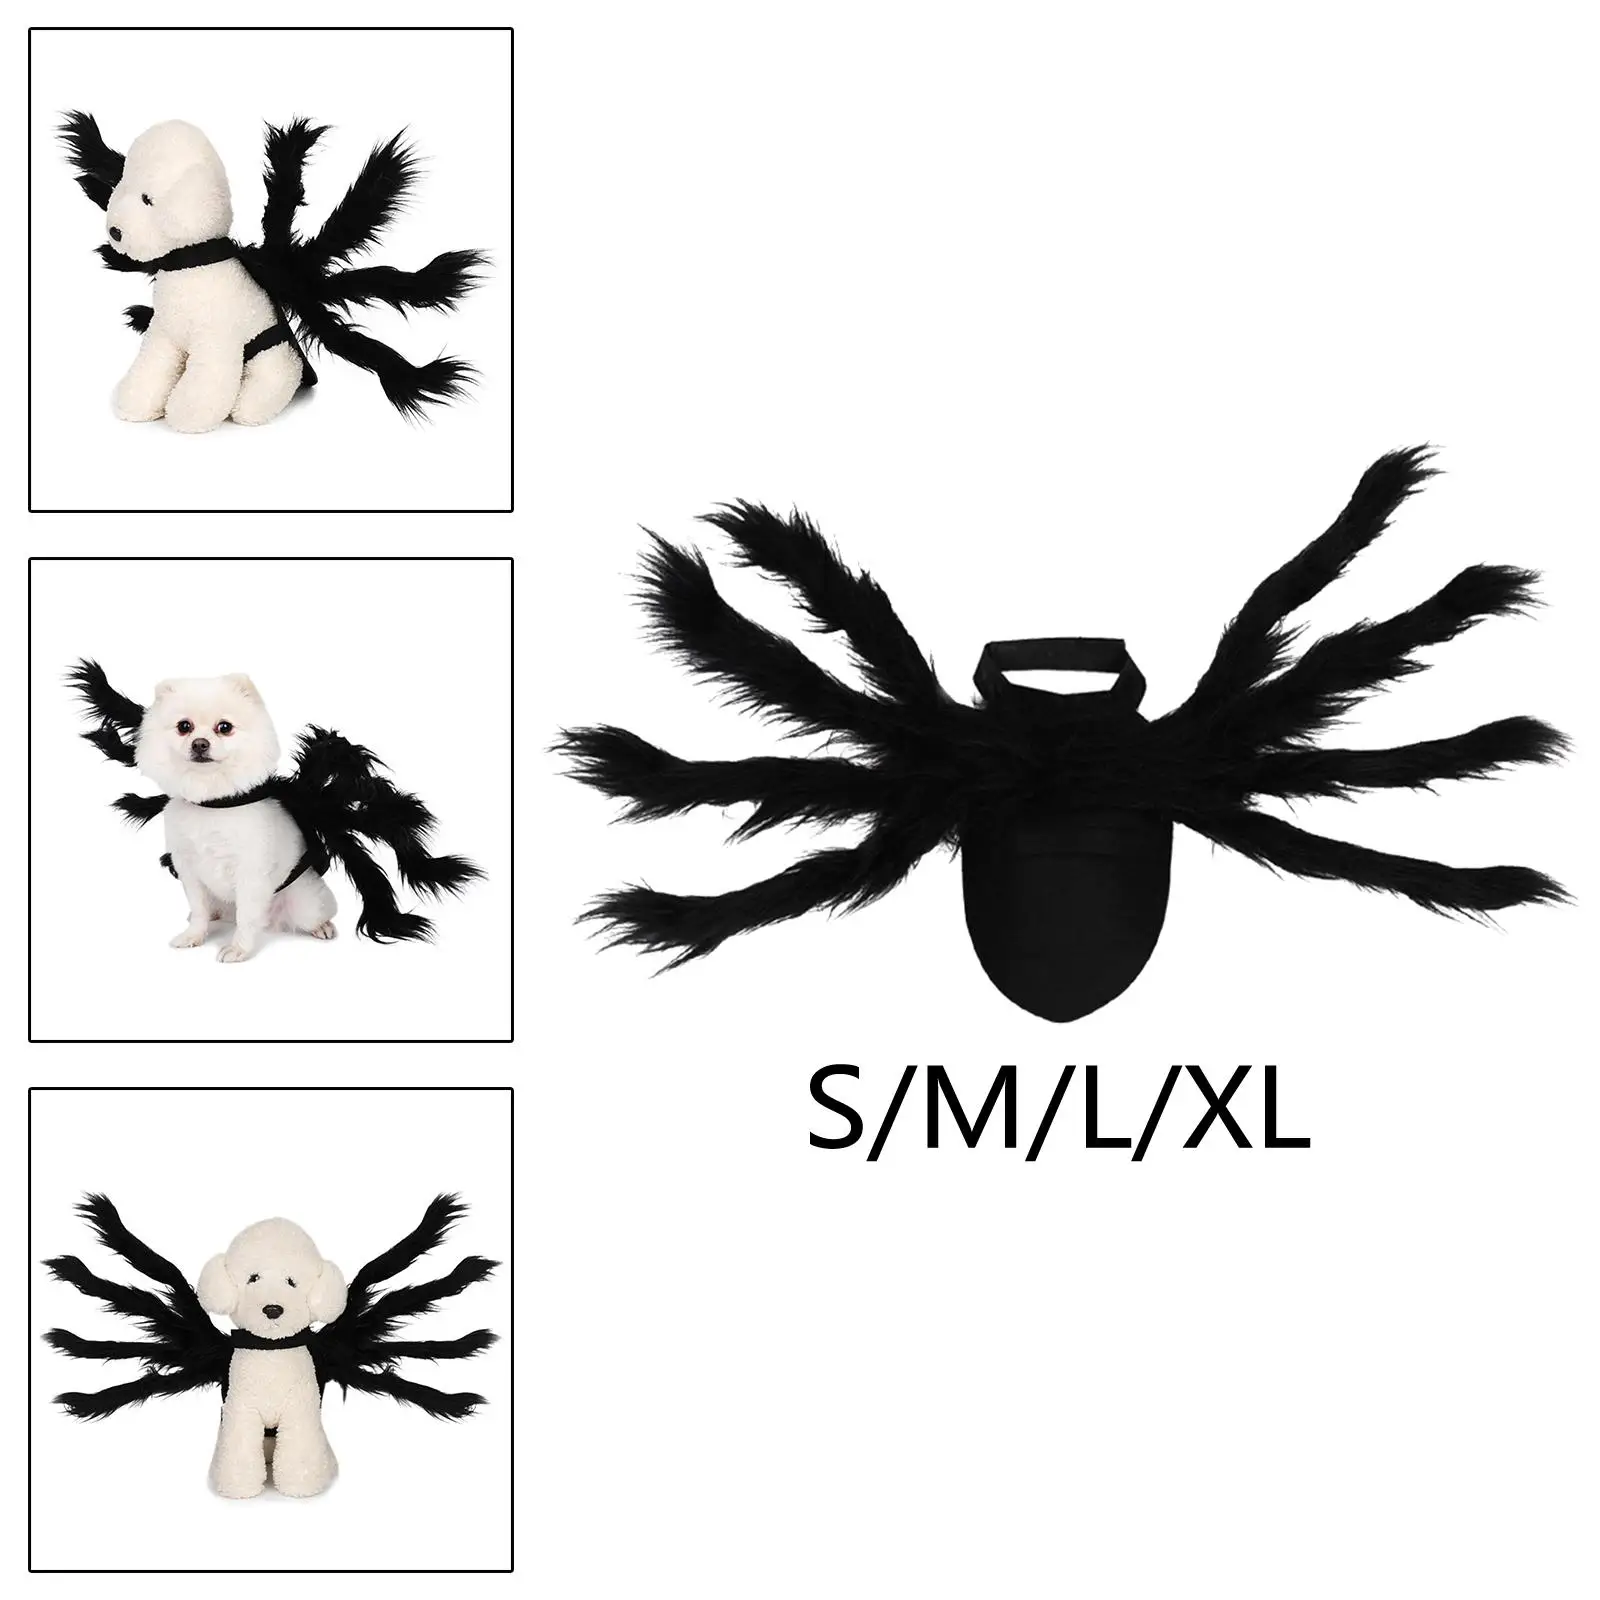 Simulation Spider Pets Outfits Pet Costume for Holiday Kitten